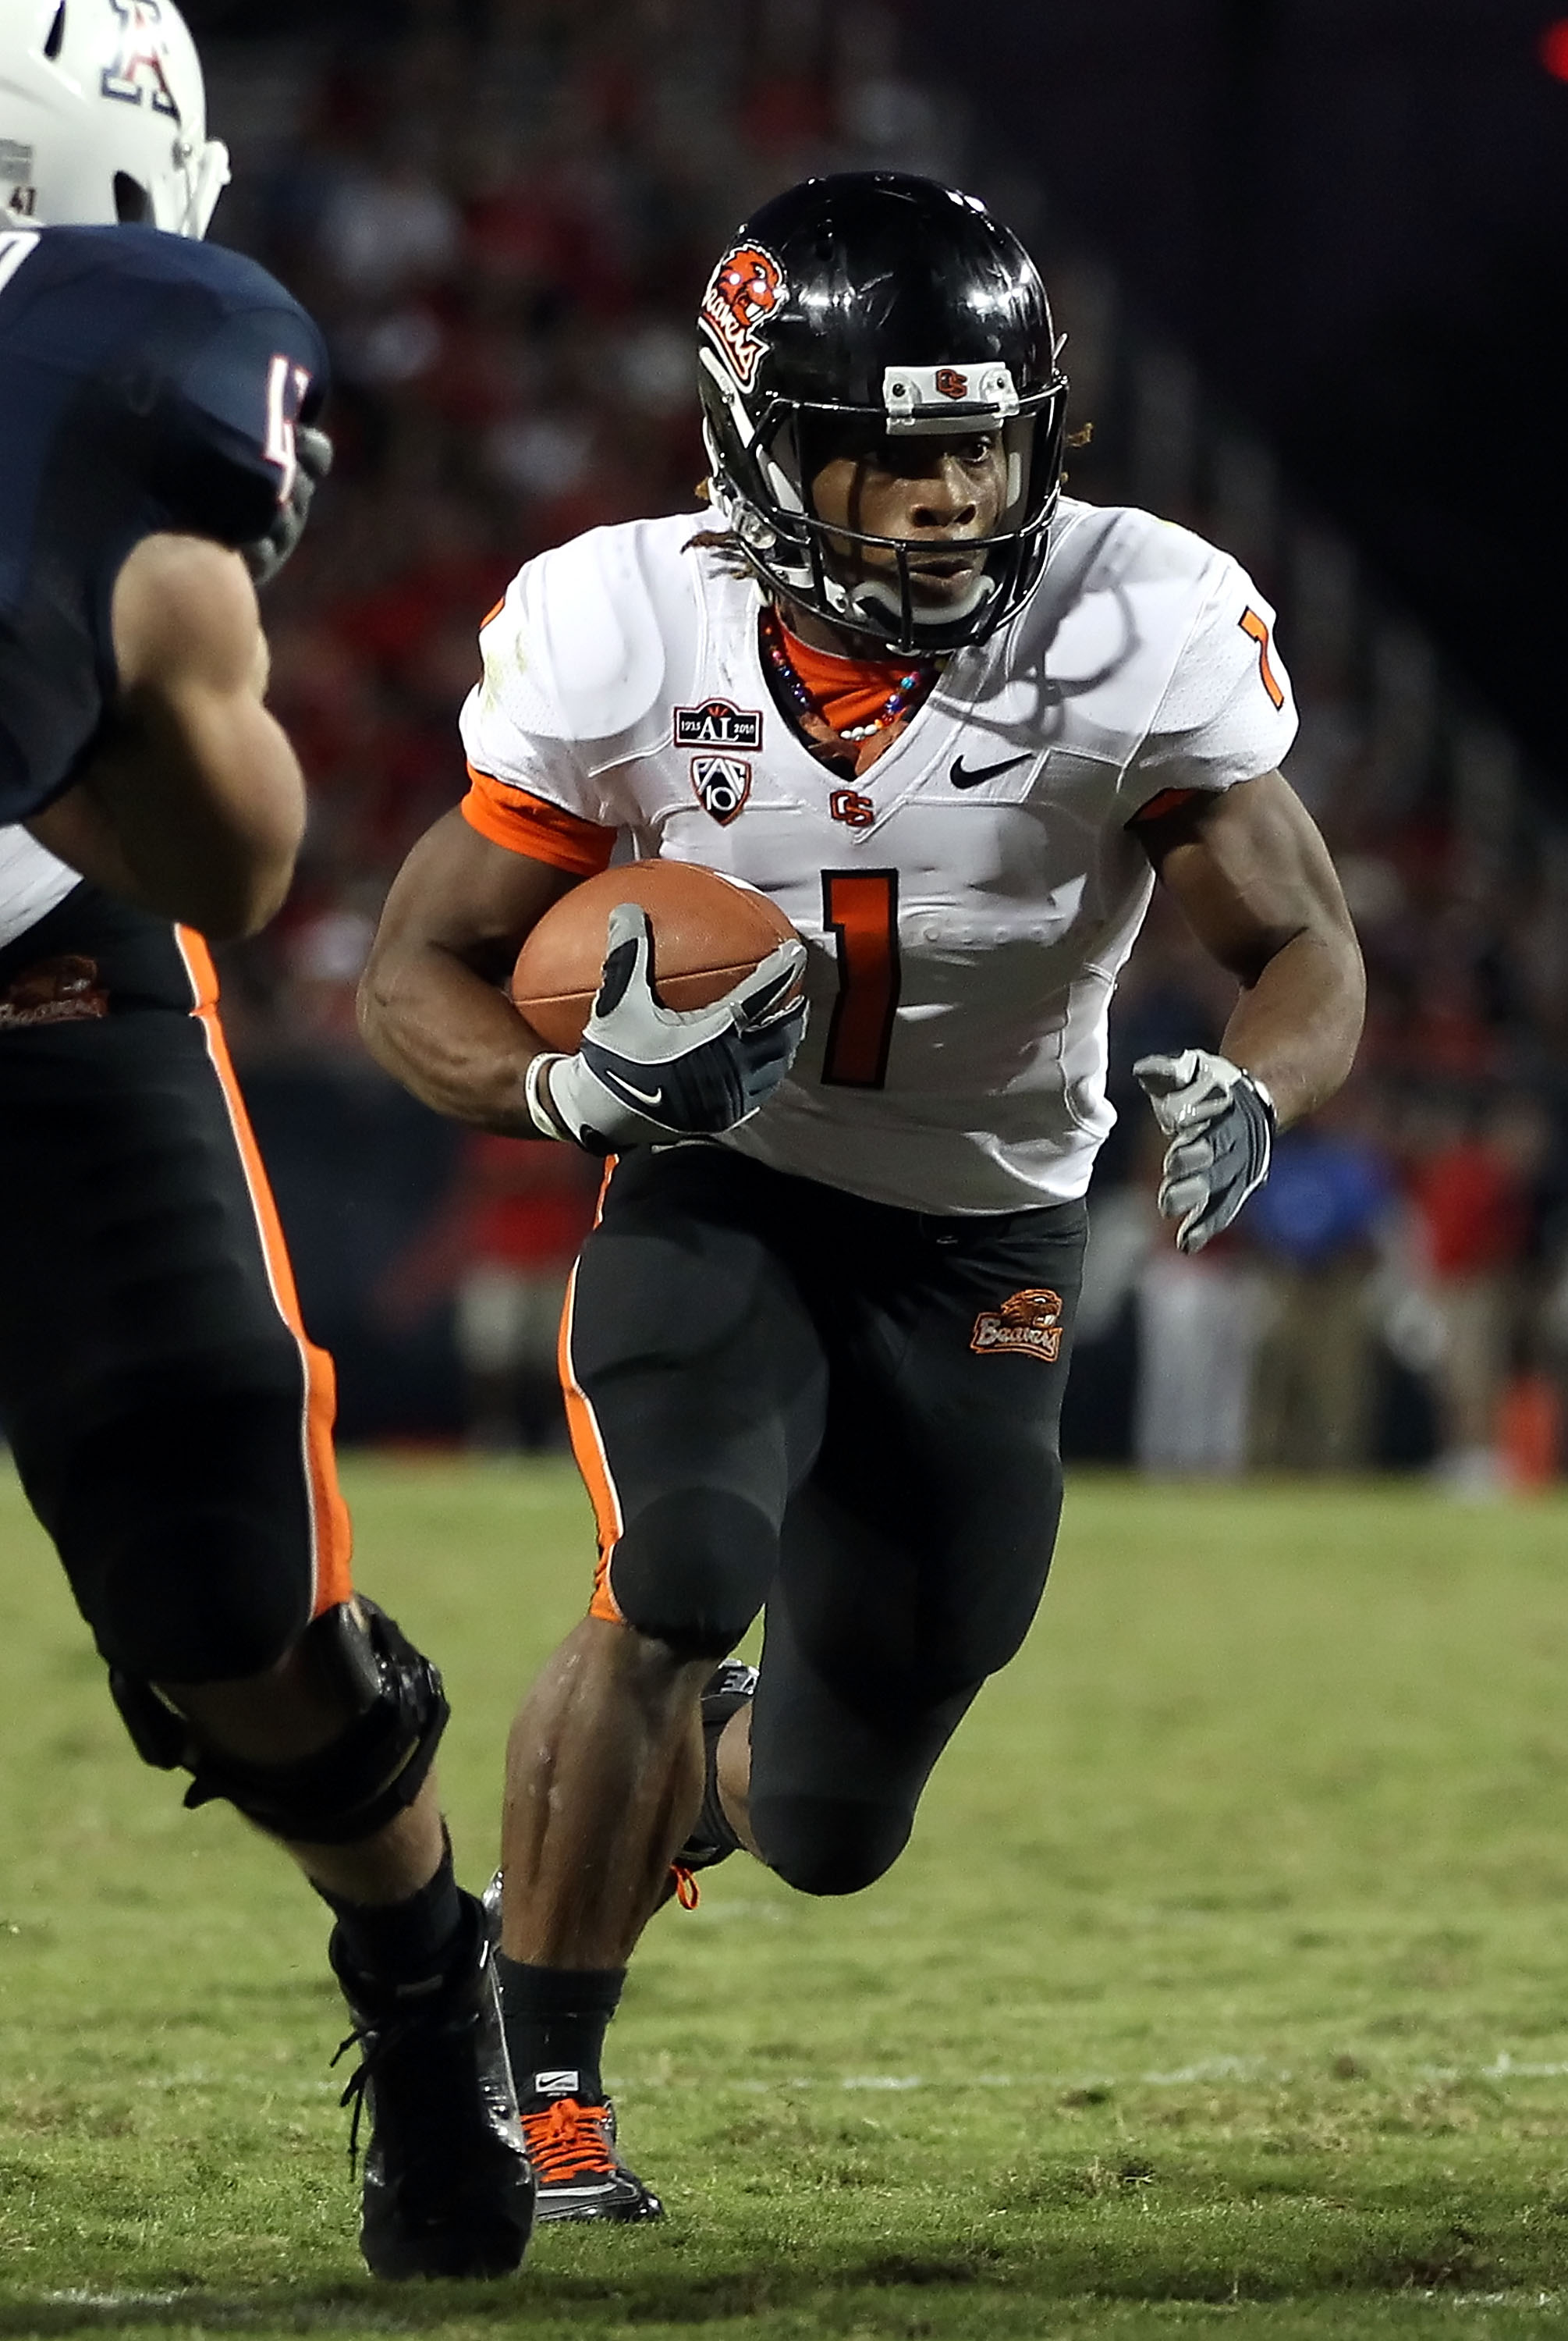 TUCSON, AZ - OCTOBER 09:  Runningback Jacquizz Rodgers #1 of the Oregon State Beavers runs with the football during the college football game against the Arizona Wildcats at Arizona Stadium on October 9, 2010 in Tucson, Arizona. The Beavers defeated the W